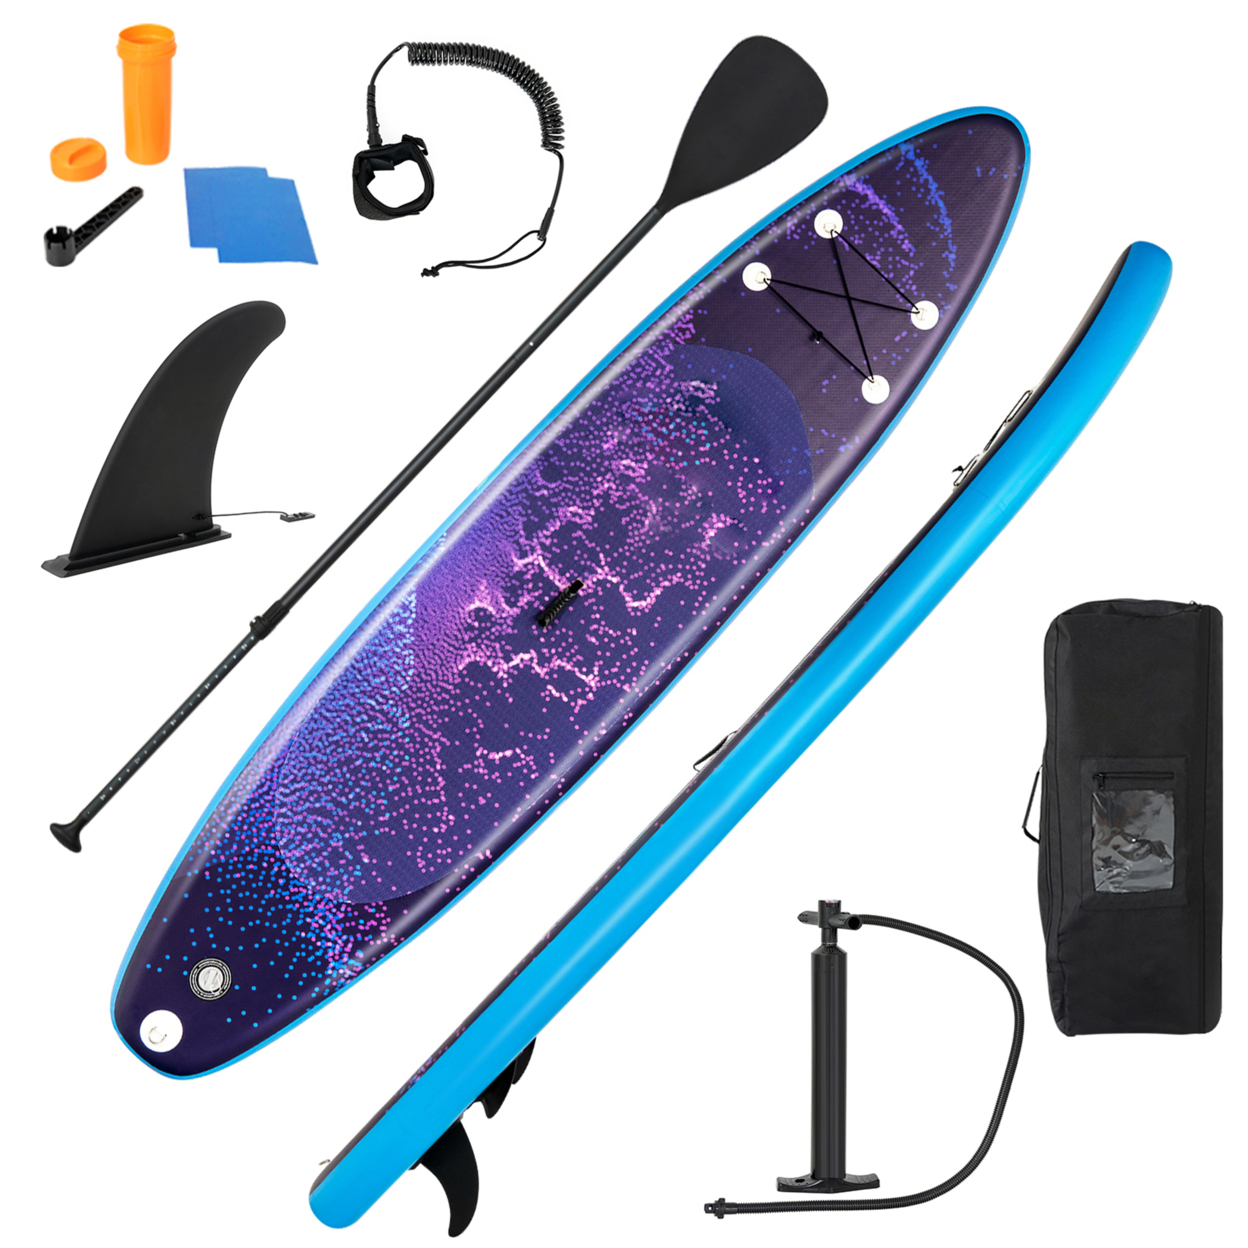 11 Ft Inflatable Stand-Up Paddle Board Non-Slip Deck Surfboard W/ Hand Pump